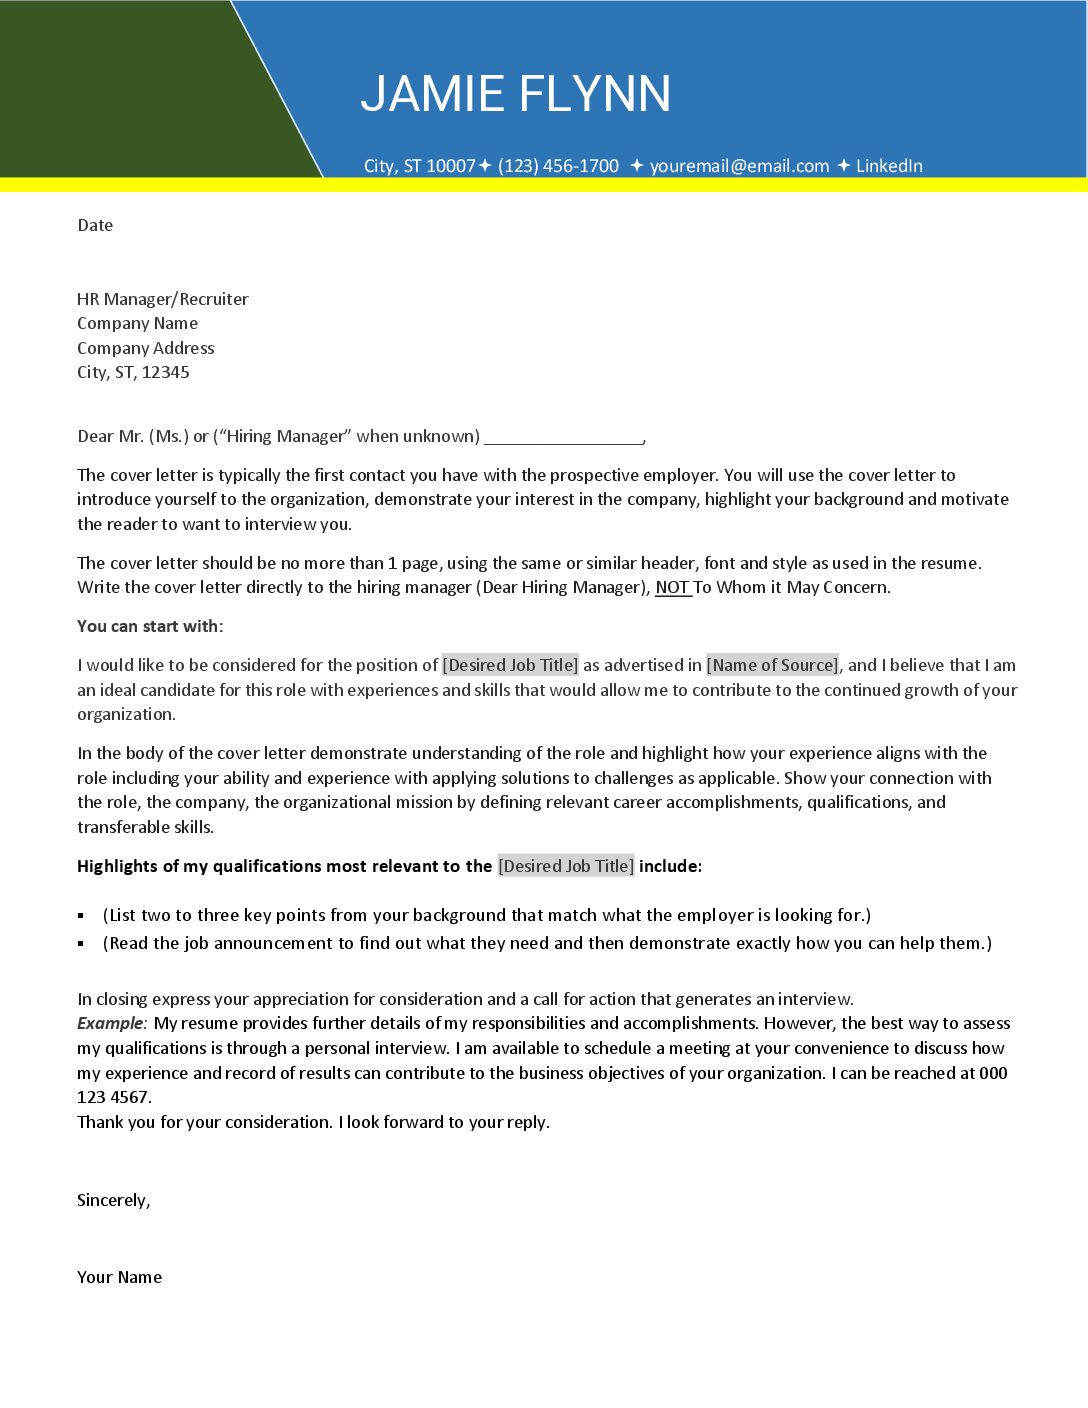 Color Block 2 Cover Letter Template